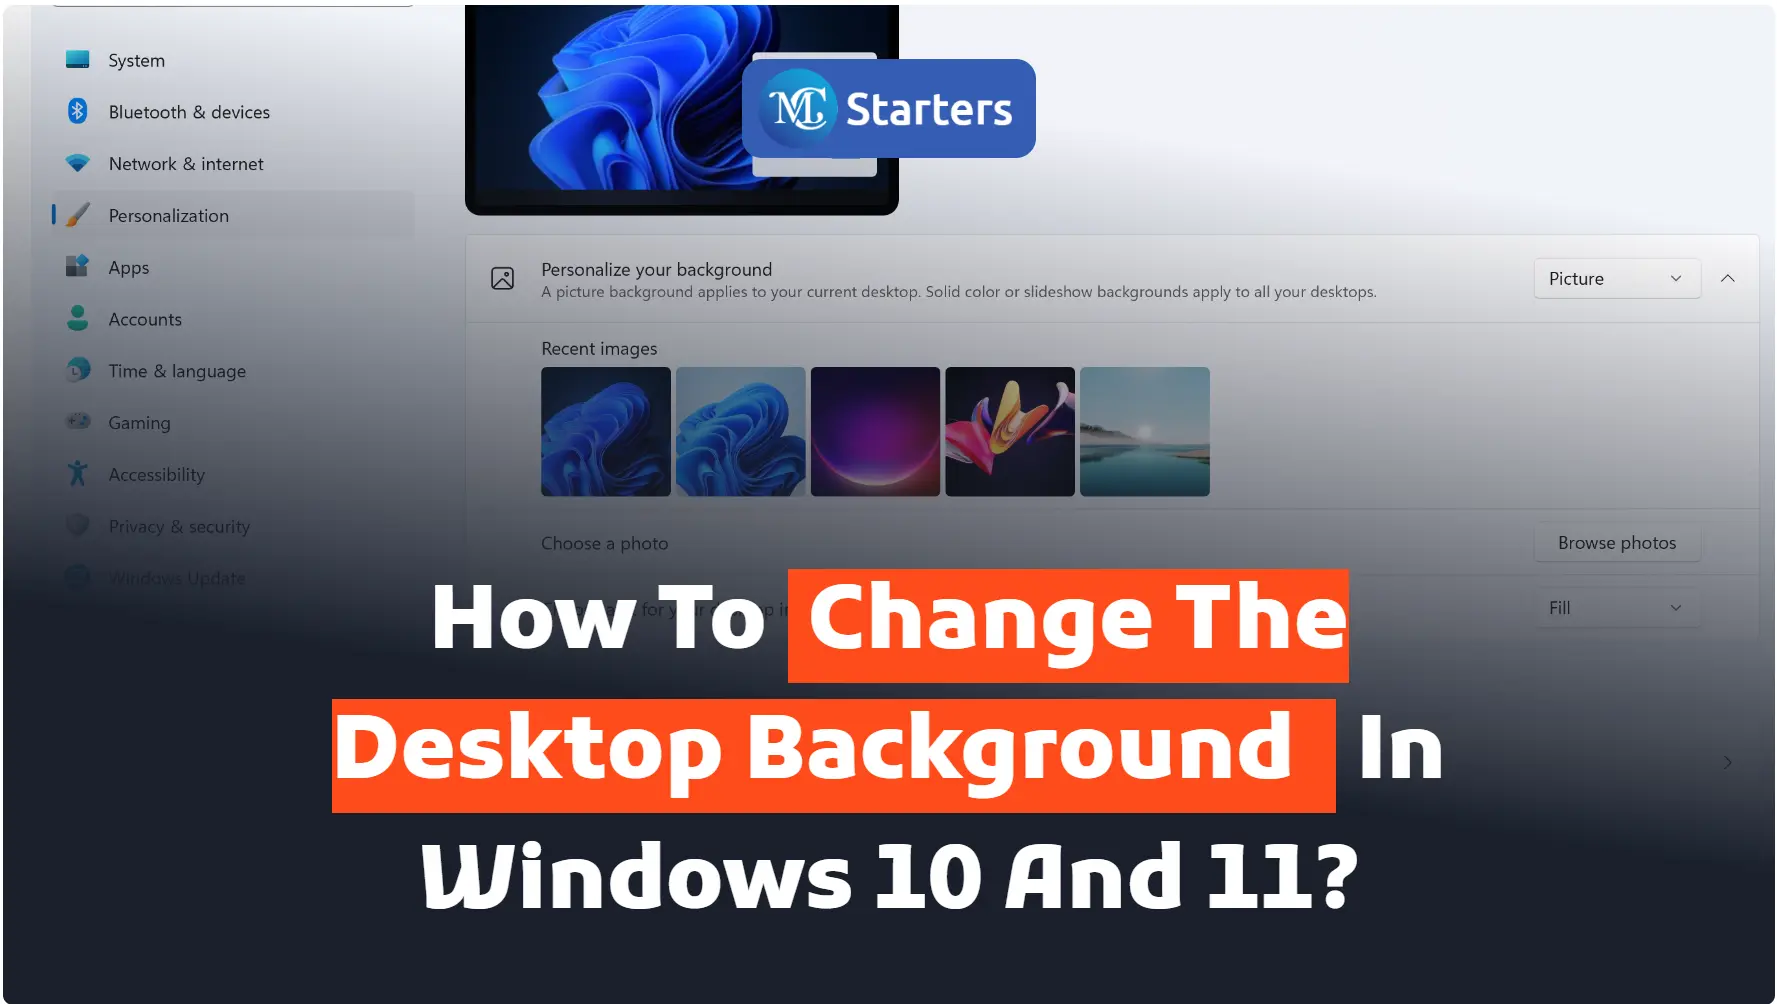 How to Change the Desktop Background on Windows 10 and 11?